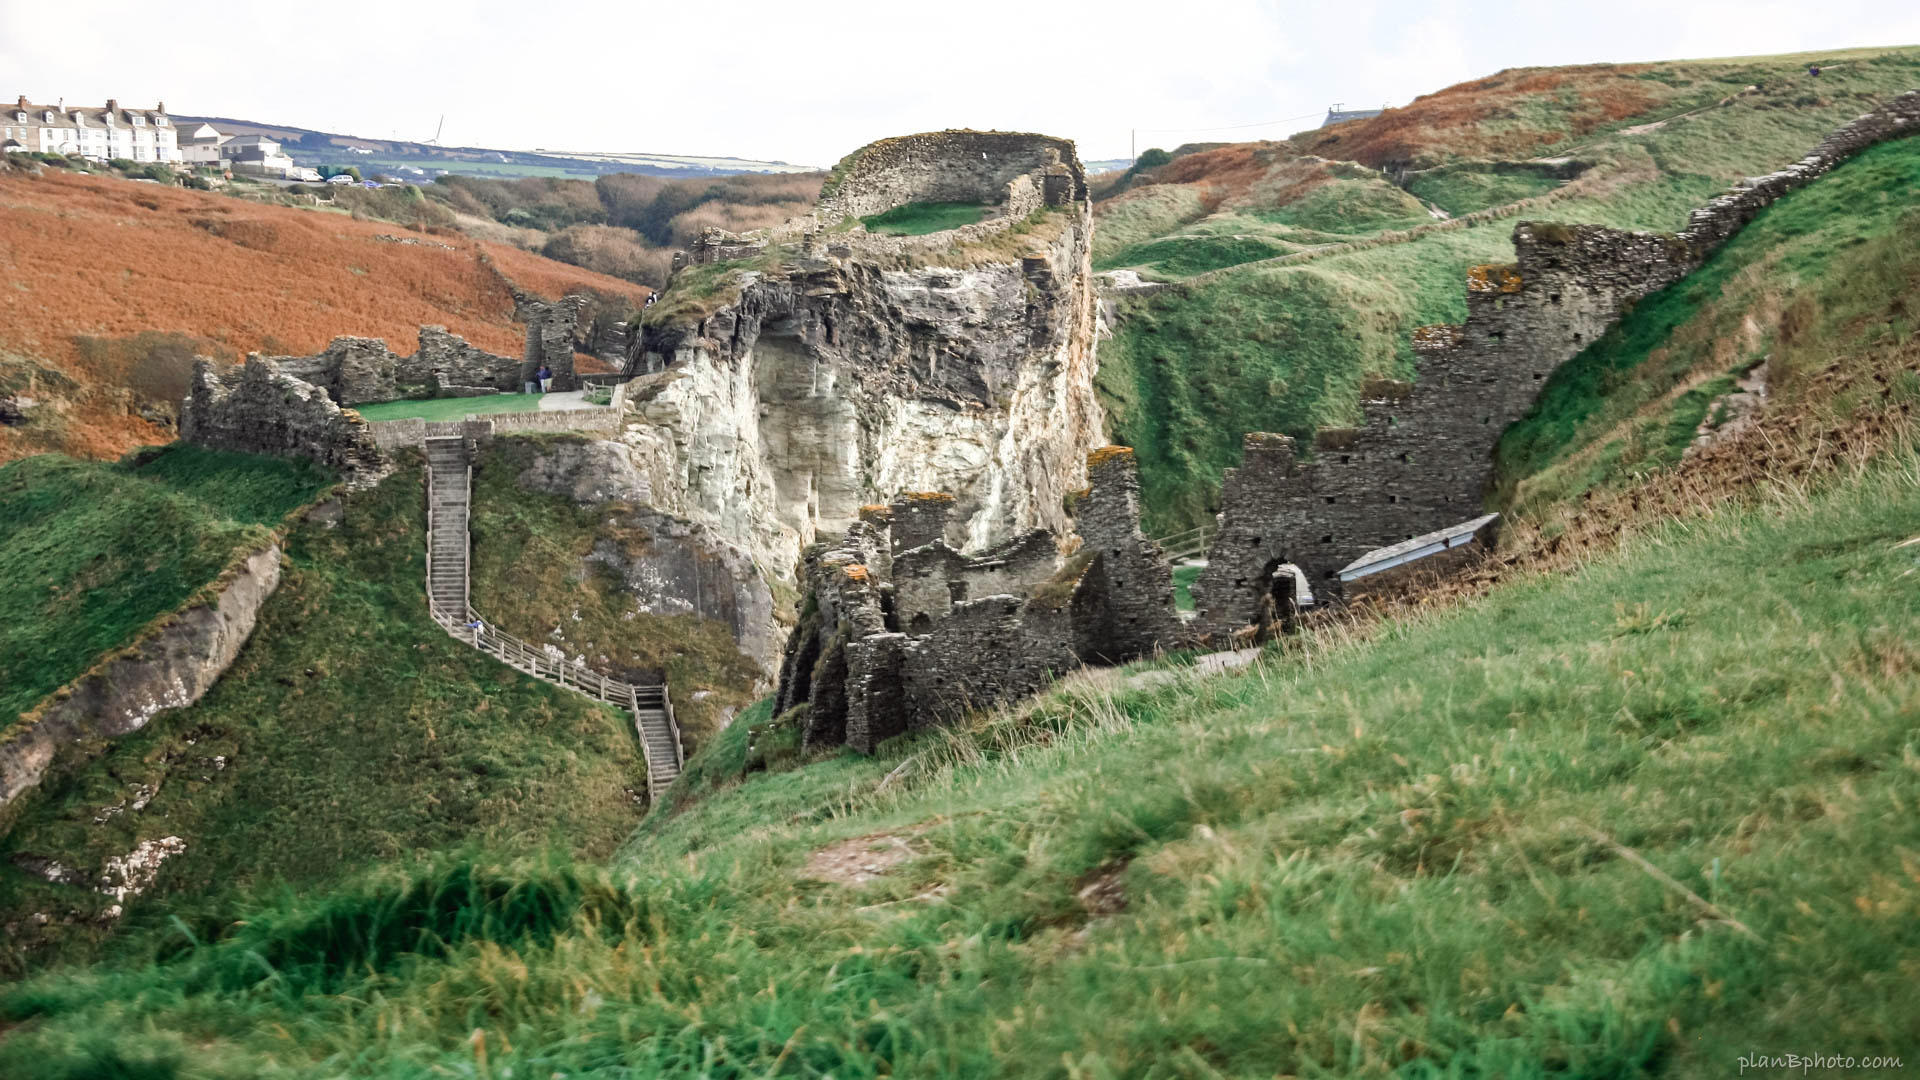 Image of the Tintagel Castle in England